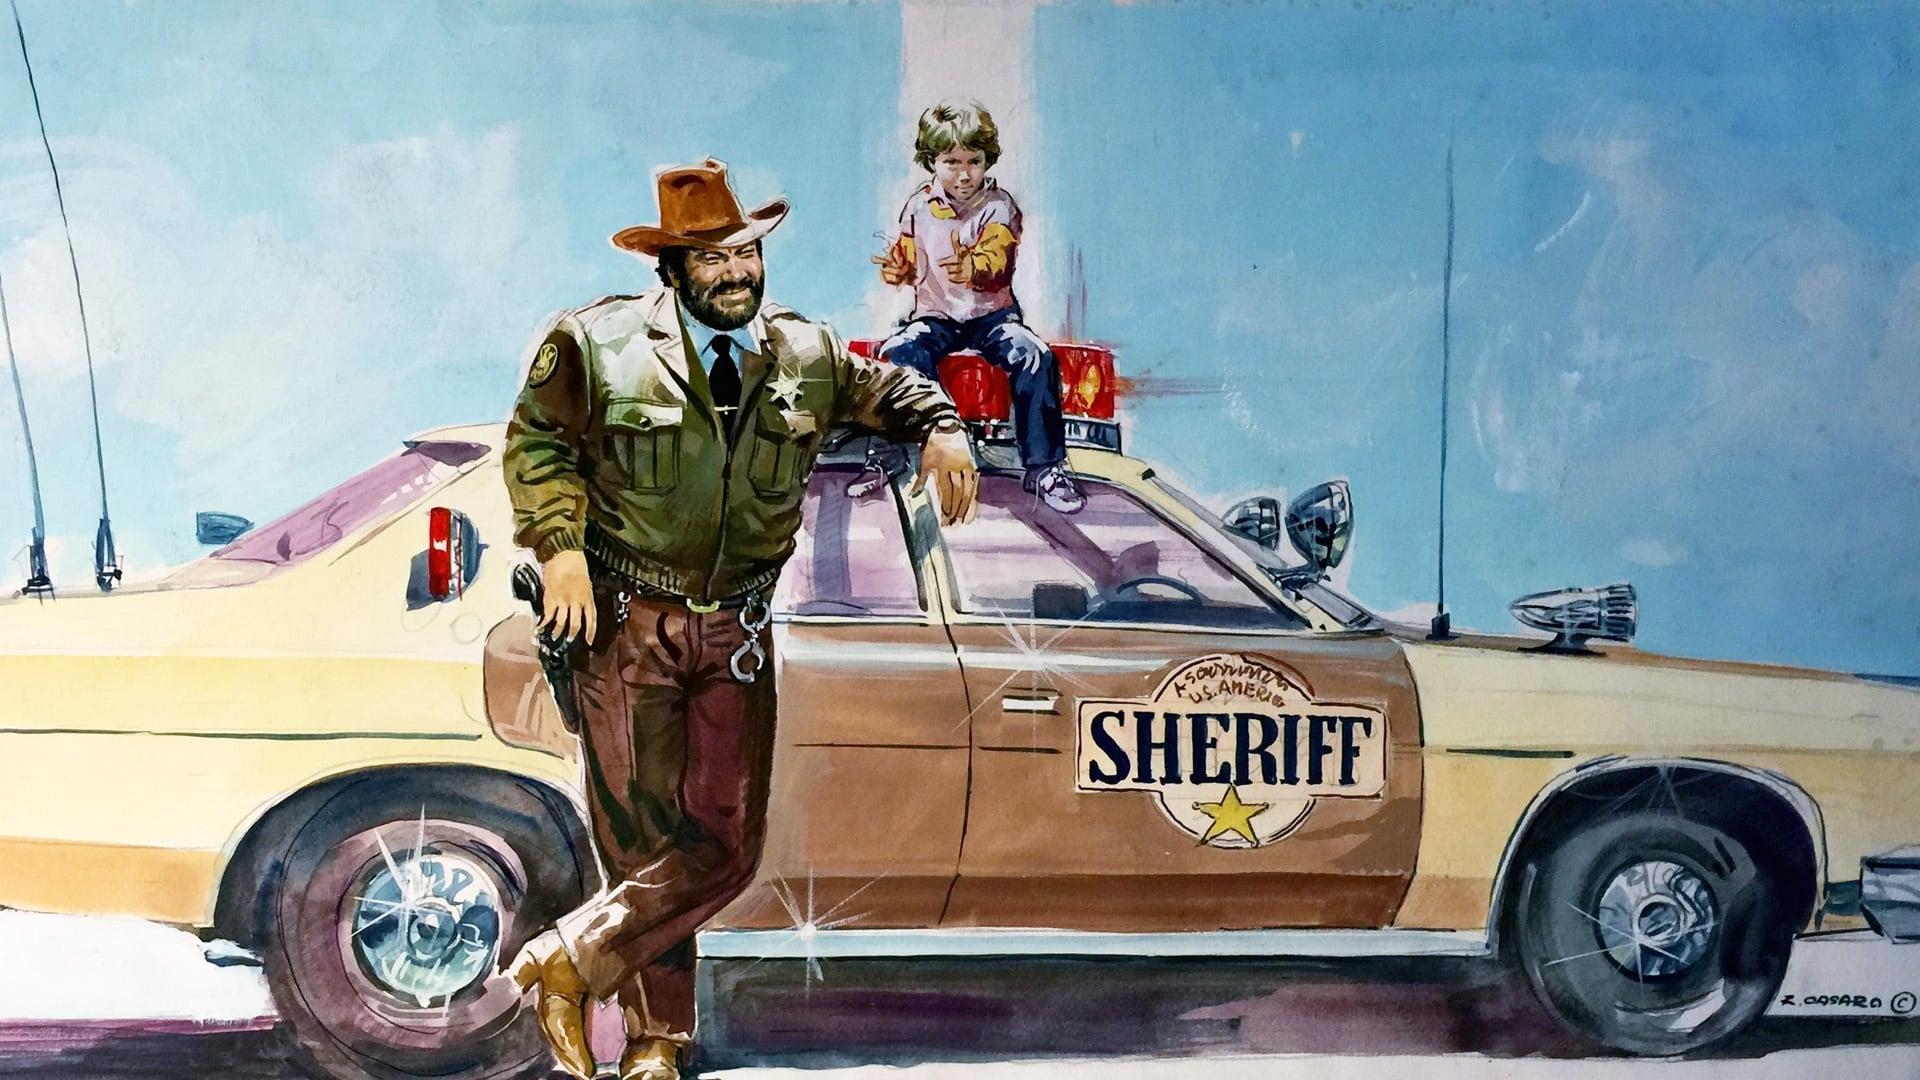 The Sheriff and the Satellite Kid backdrop